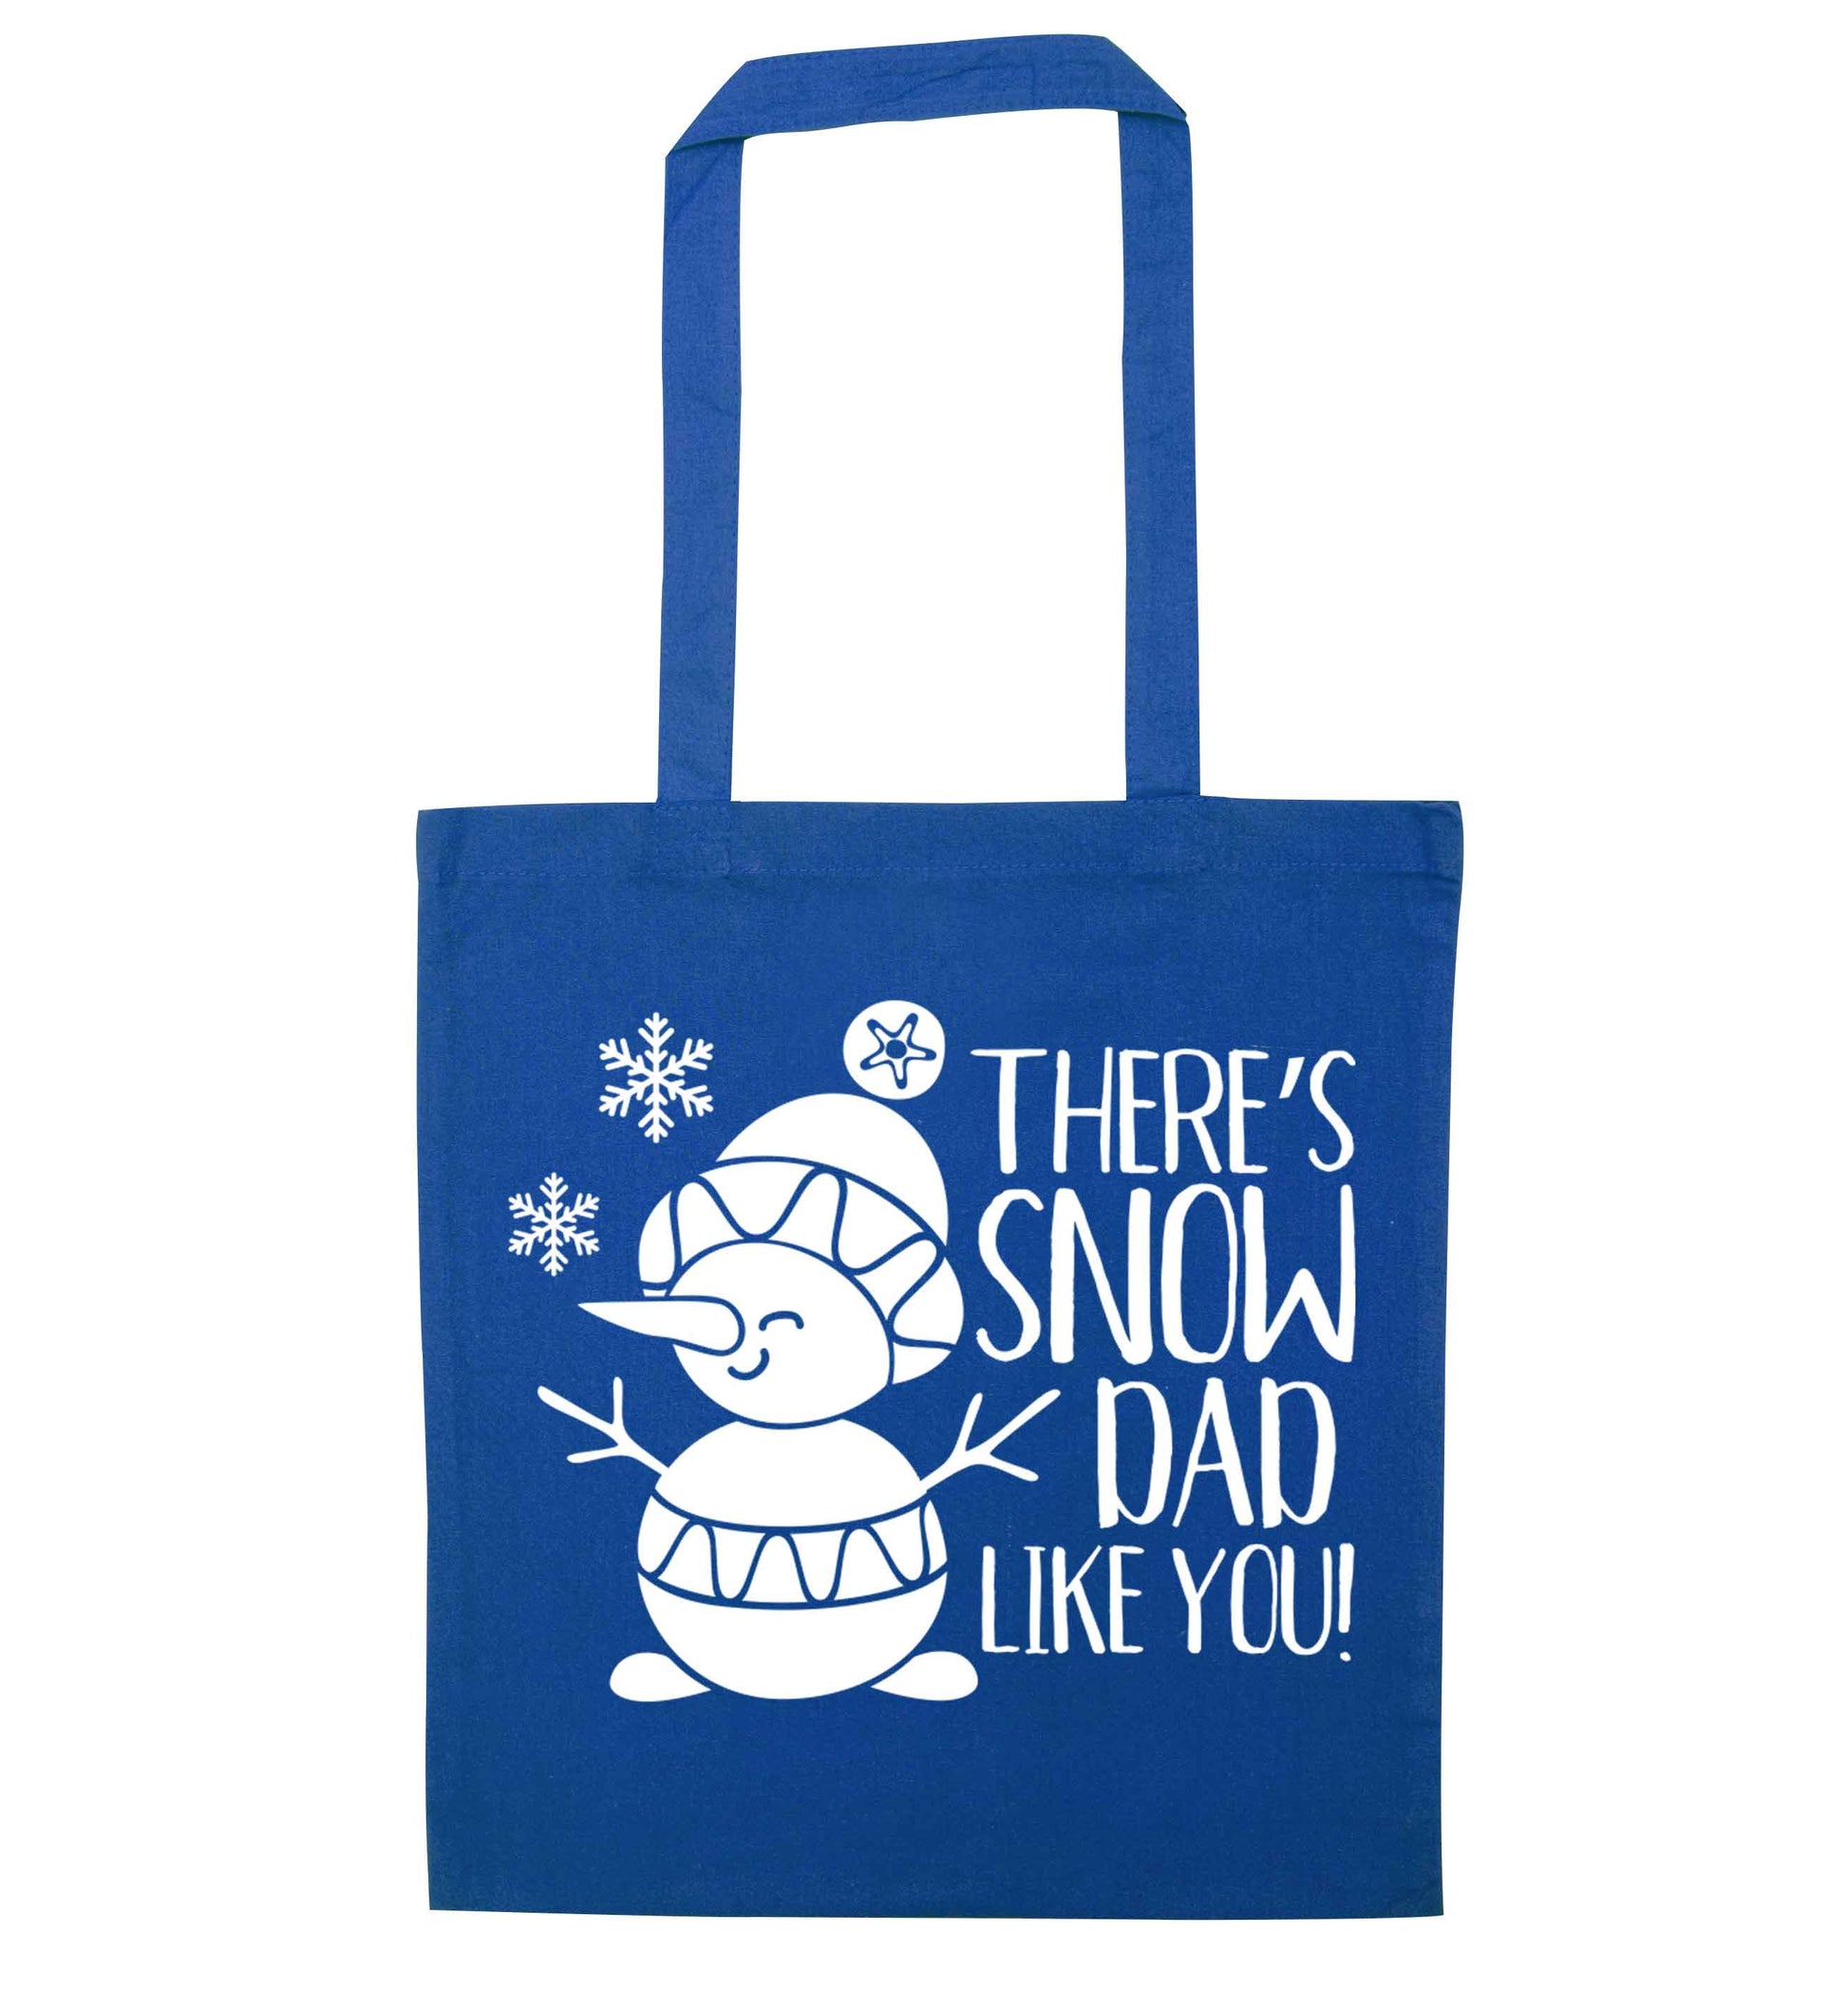 There's snow dad like you blue tote bag